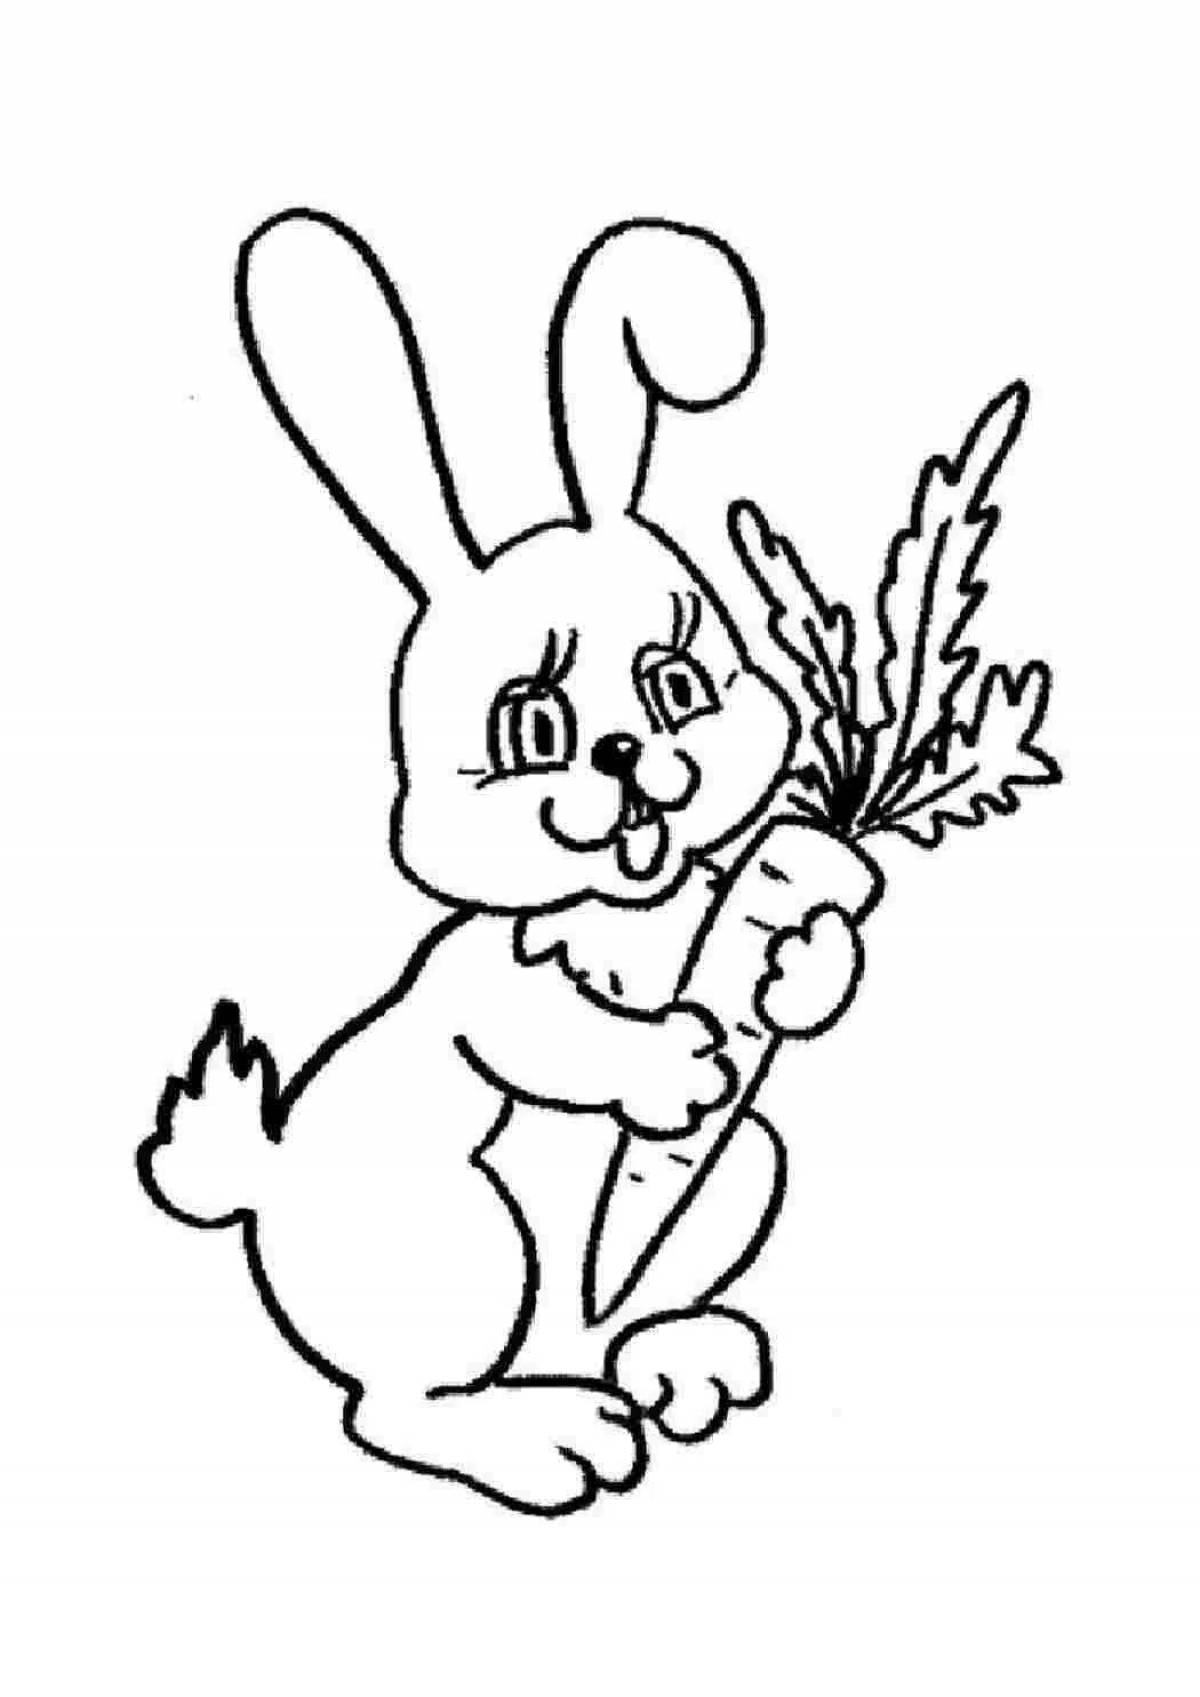 Coloring book cheerful hare with a carrot